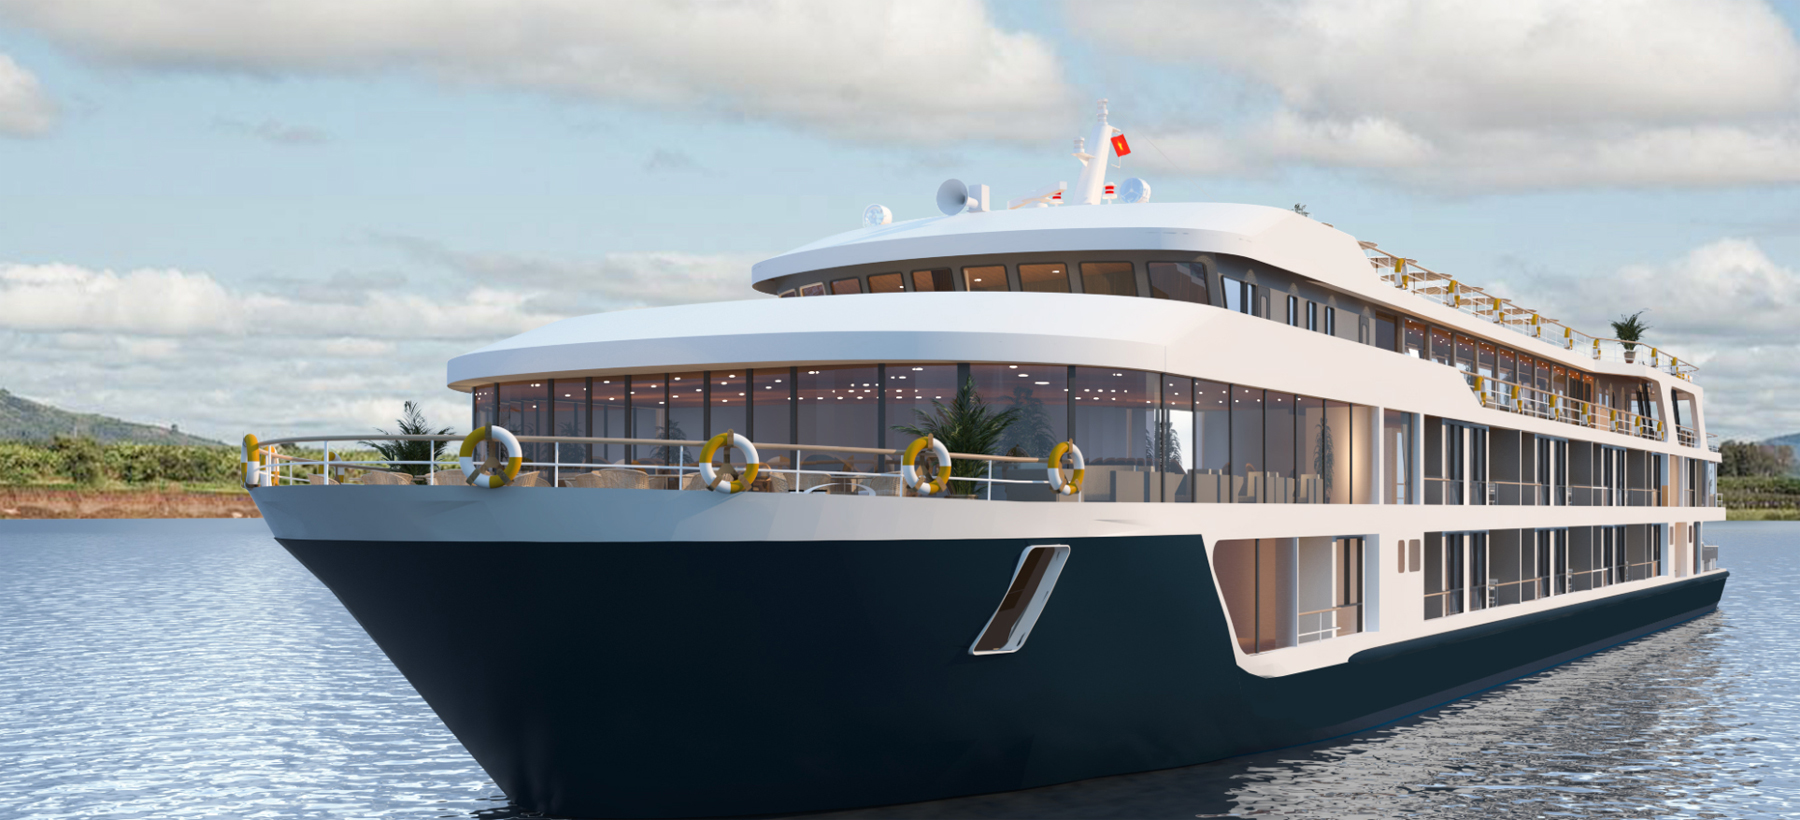 Wendy Wu Tours to launch its first river cruise ship in Asia